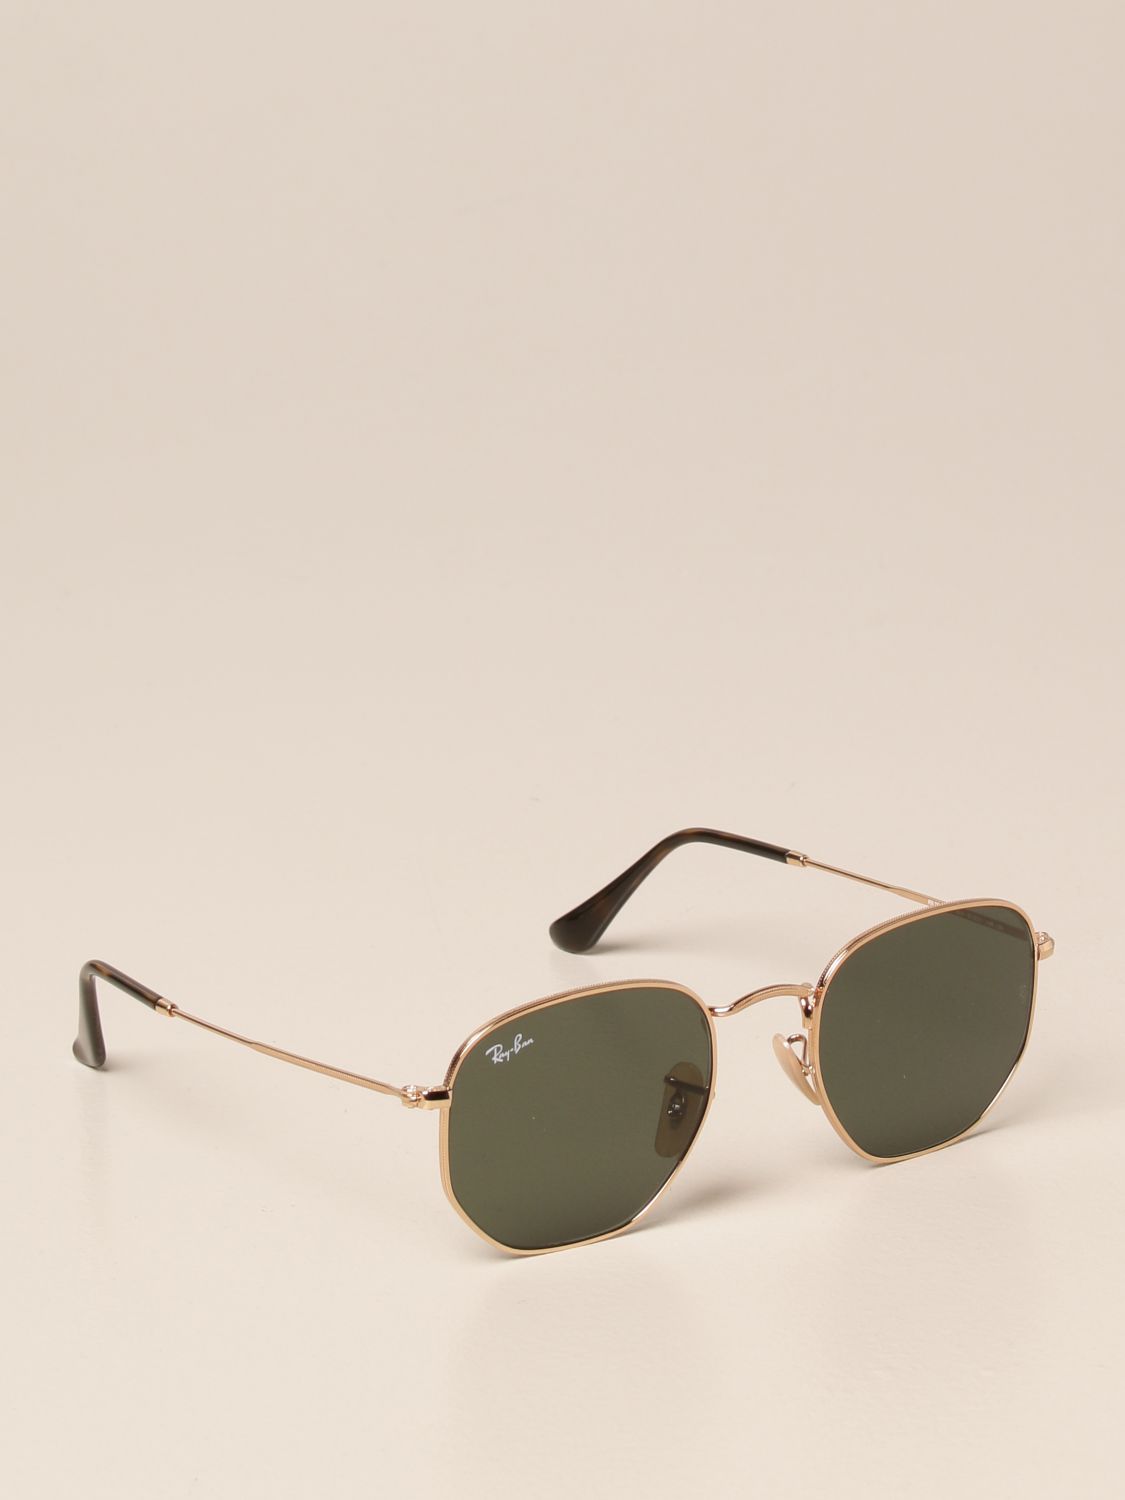 Ray Ban Outlet Sunglasses For Woman Green Ray Ban Sunglasses Rb 3548 N Online At Giglio